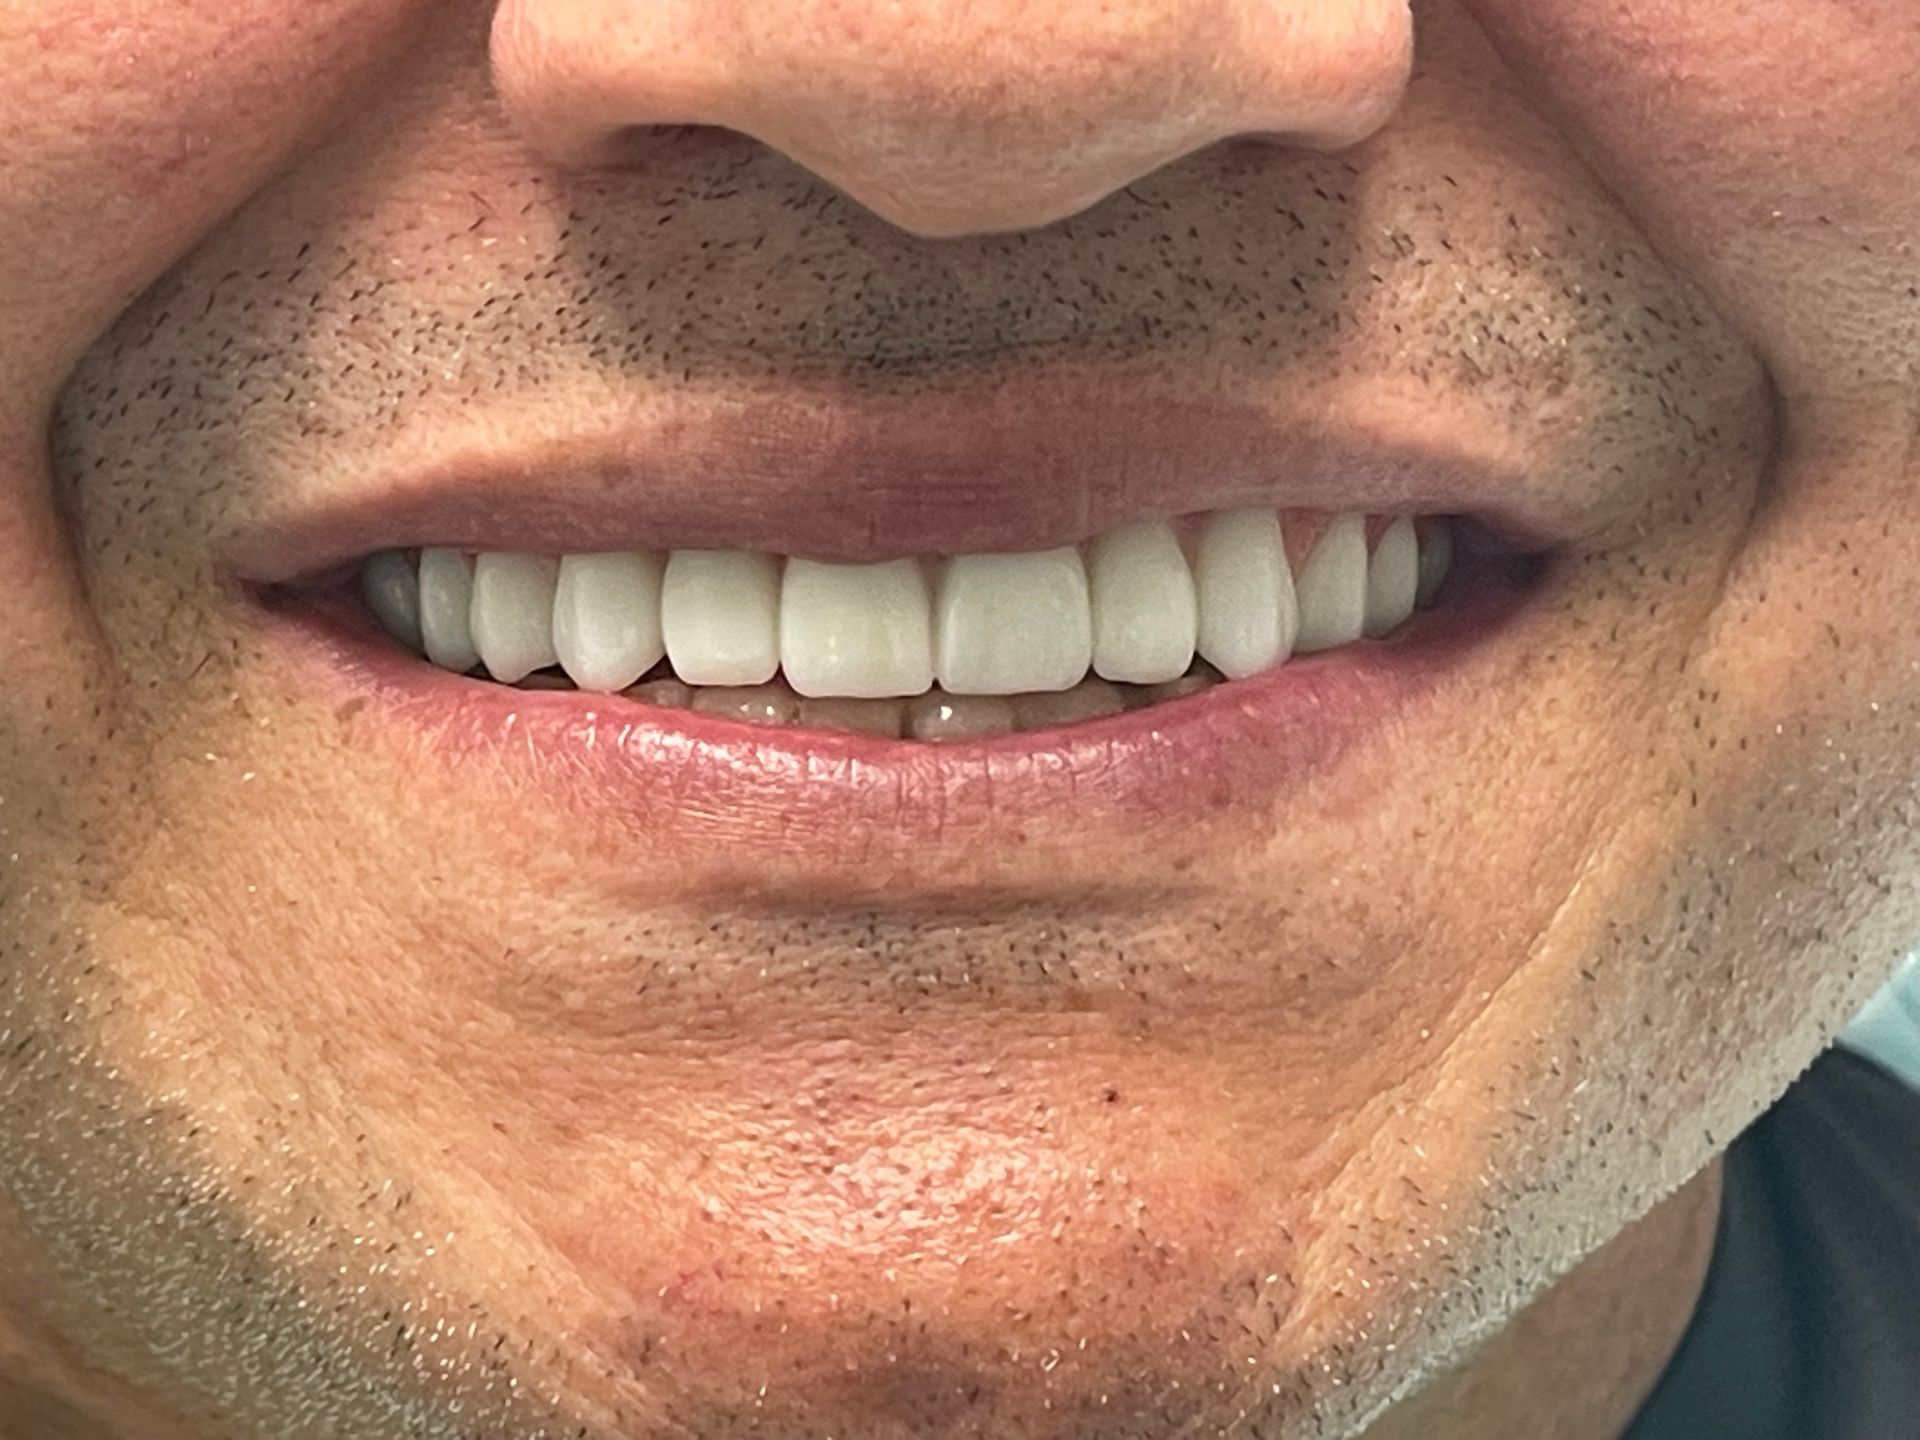 a close up of a man 's mouth with white teeth | all on x | Upper only, full arch dentistry | Before and After Dental Treatment | Barclay Family Dental | Best Dentist For Family Dentistry, Dental Implants, and Cosmetic Dentistry in Cherry Hill, NJ